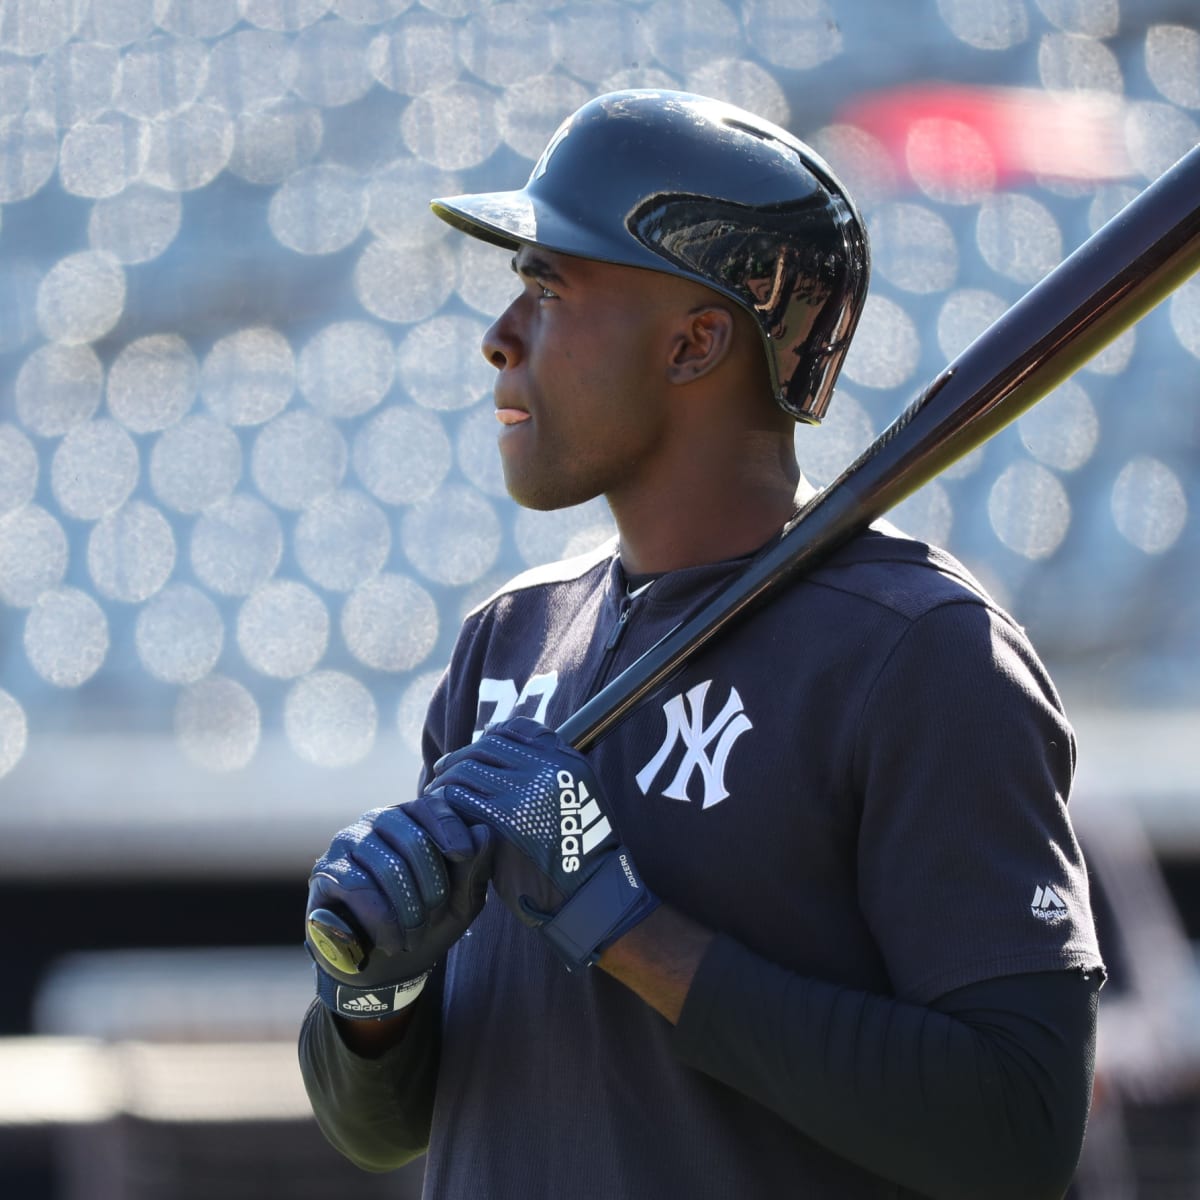 The New York Yankees are calling up Estevan Florial to the majors